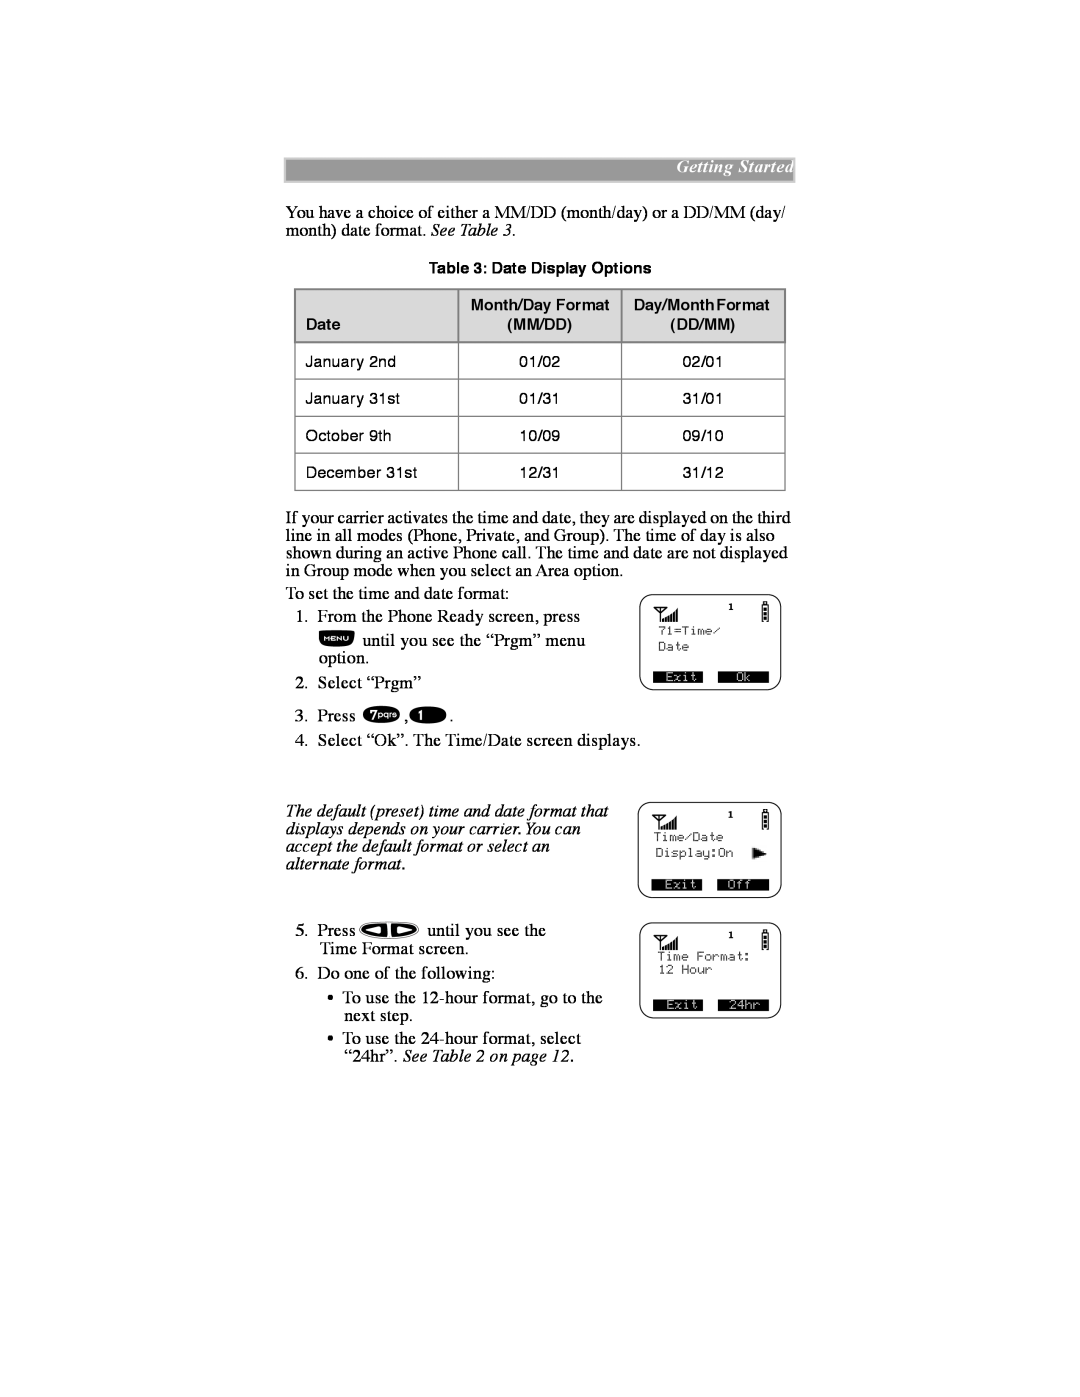 Motorola iDEN manual Getting Started, Date Display Options, Month/Day Format, Day/MonthFormat, Mm/Dd, Dd/Mm 